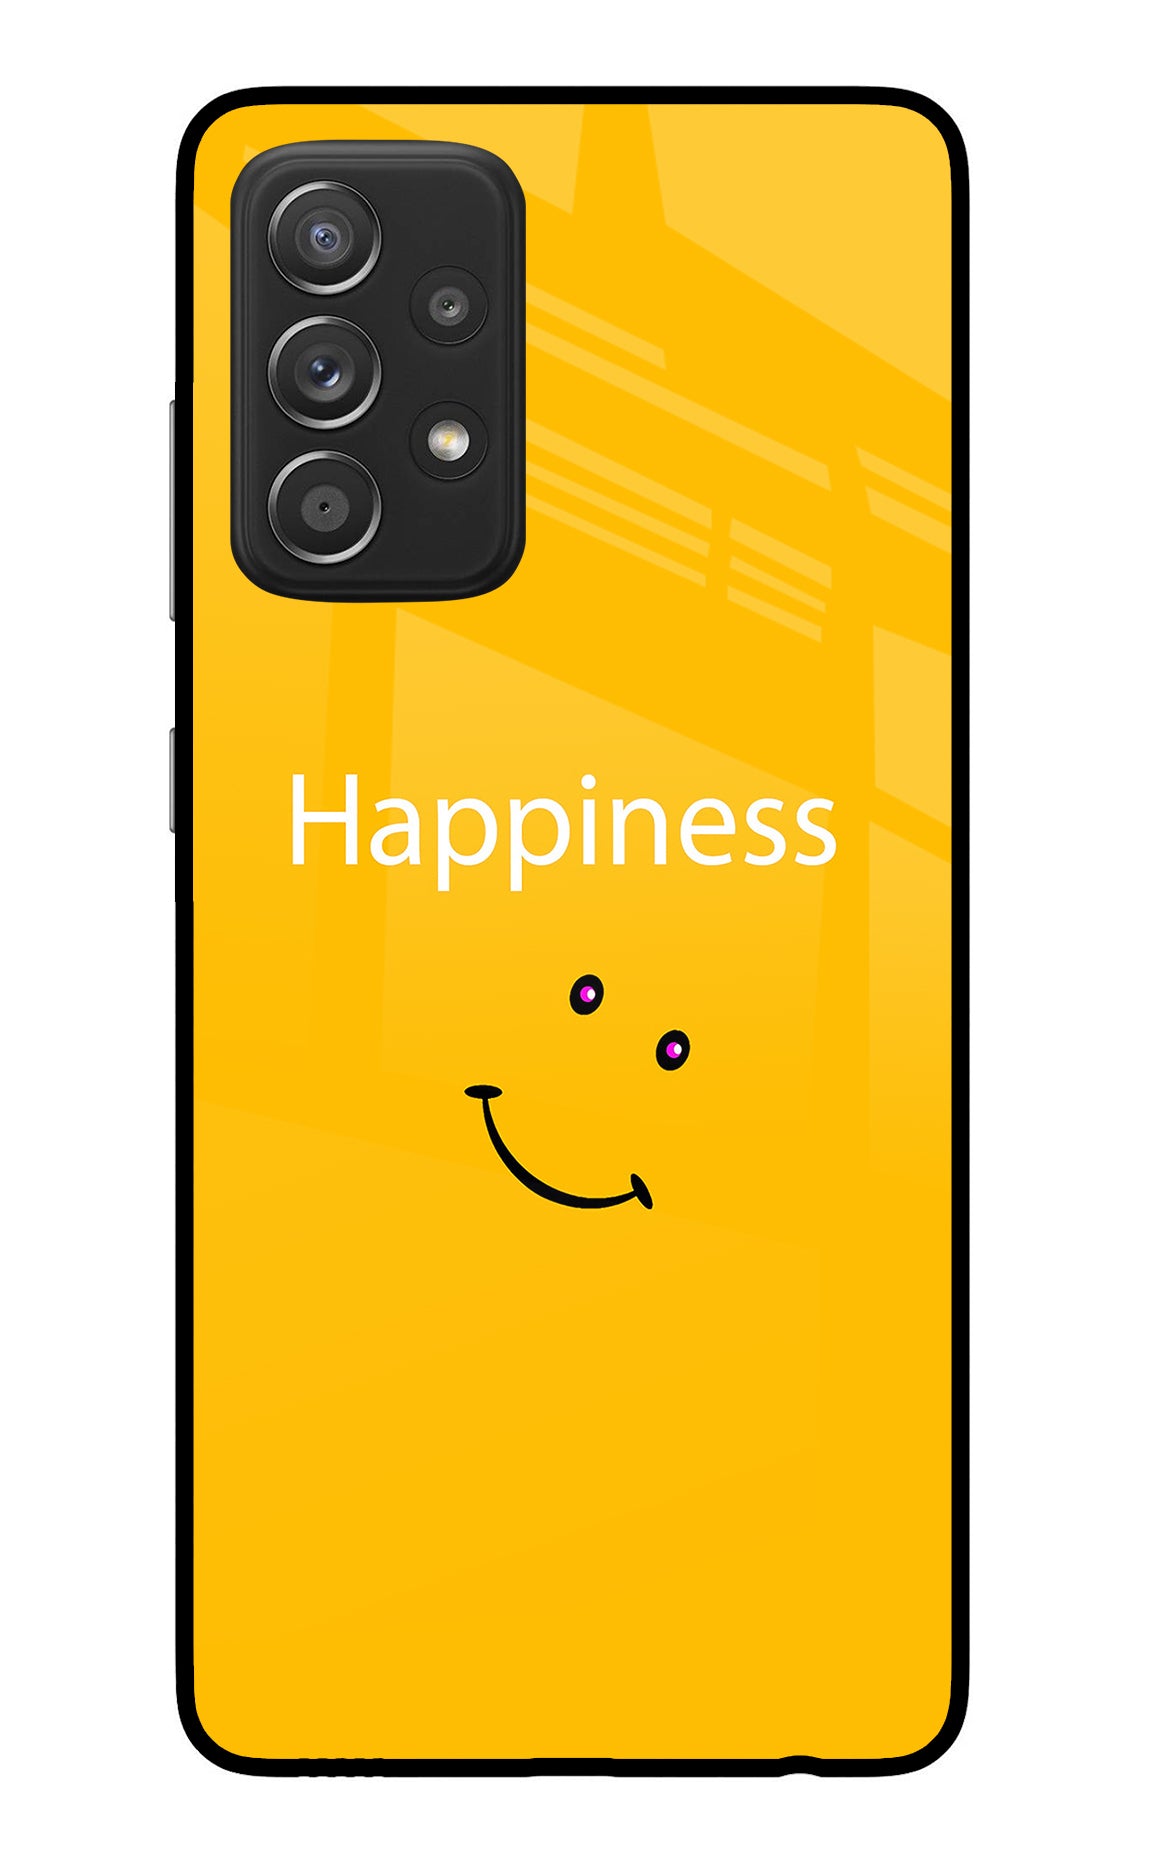 Happiness With Smiley Samsung A52/A52s 5G Back Cover